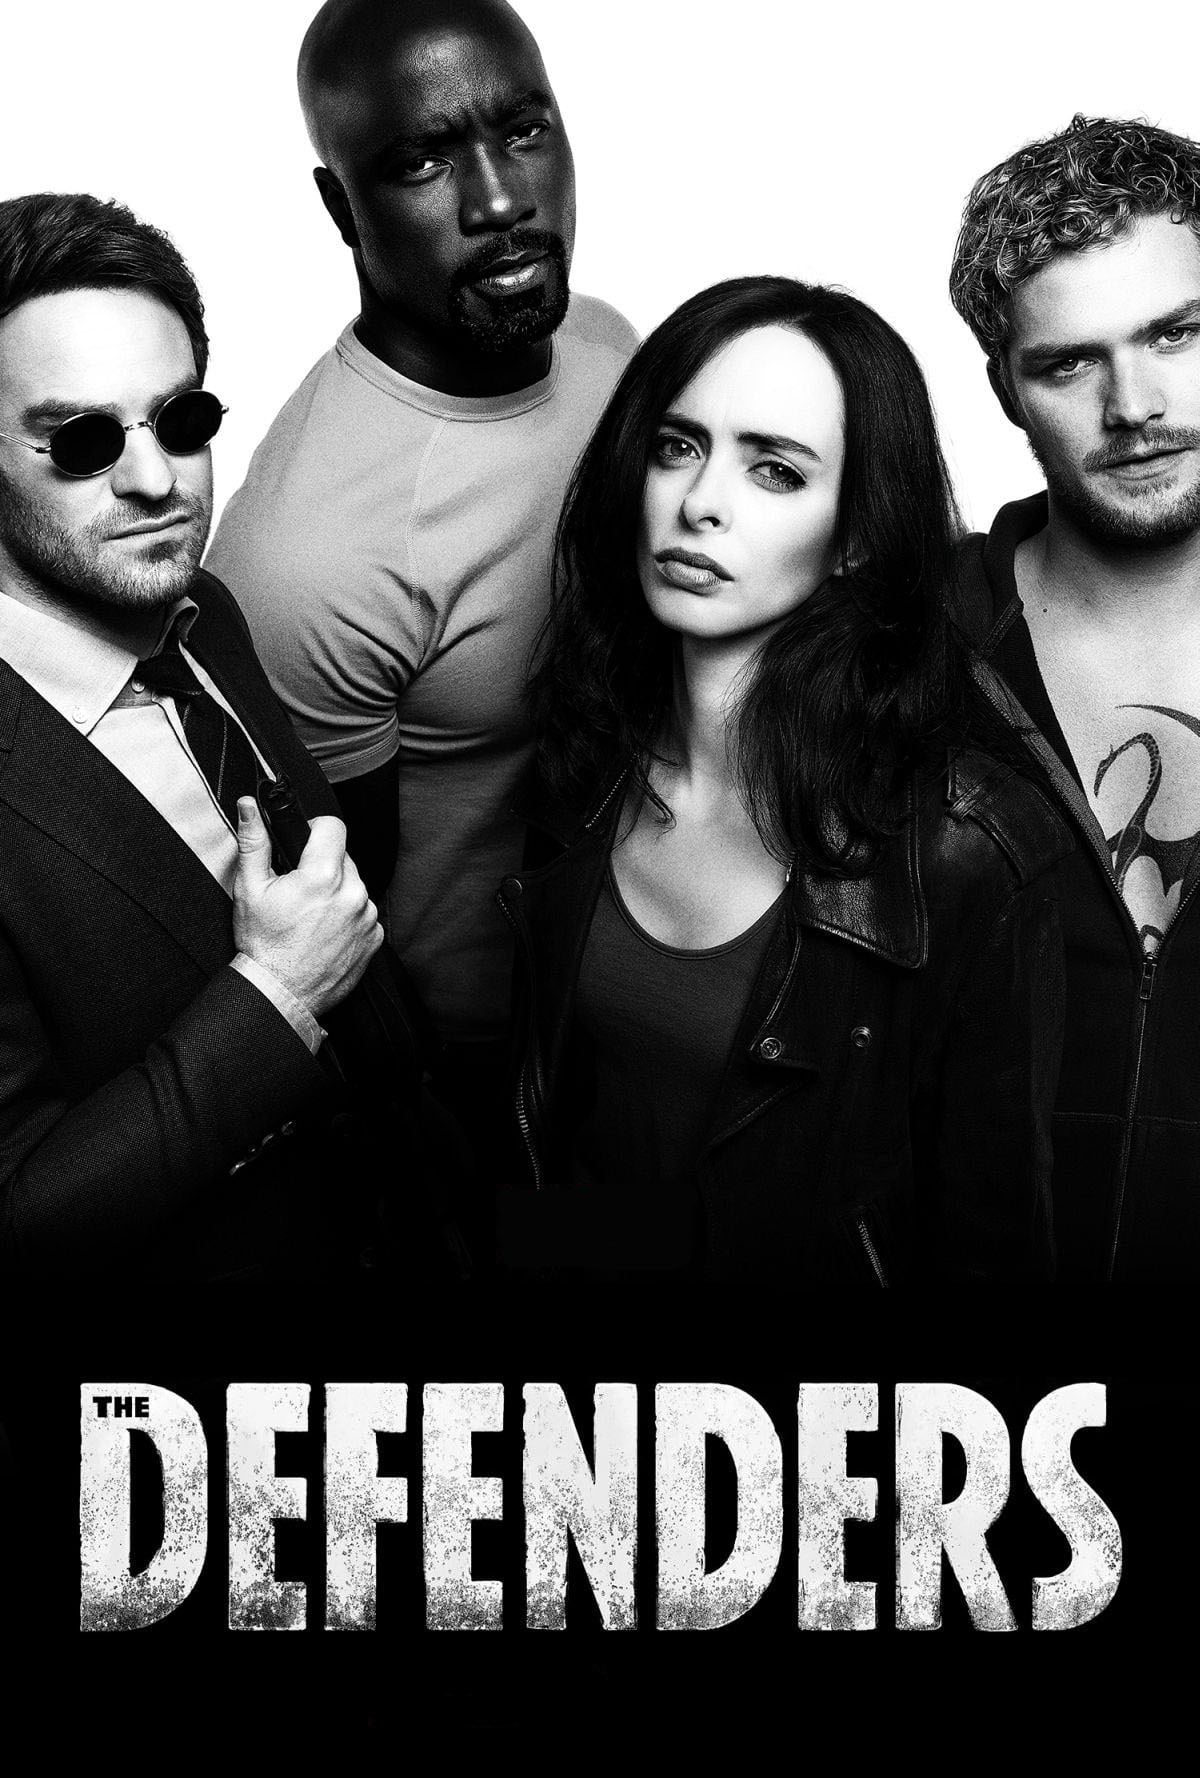 Marvel's The Defenders TV Shows About Superhero Team